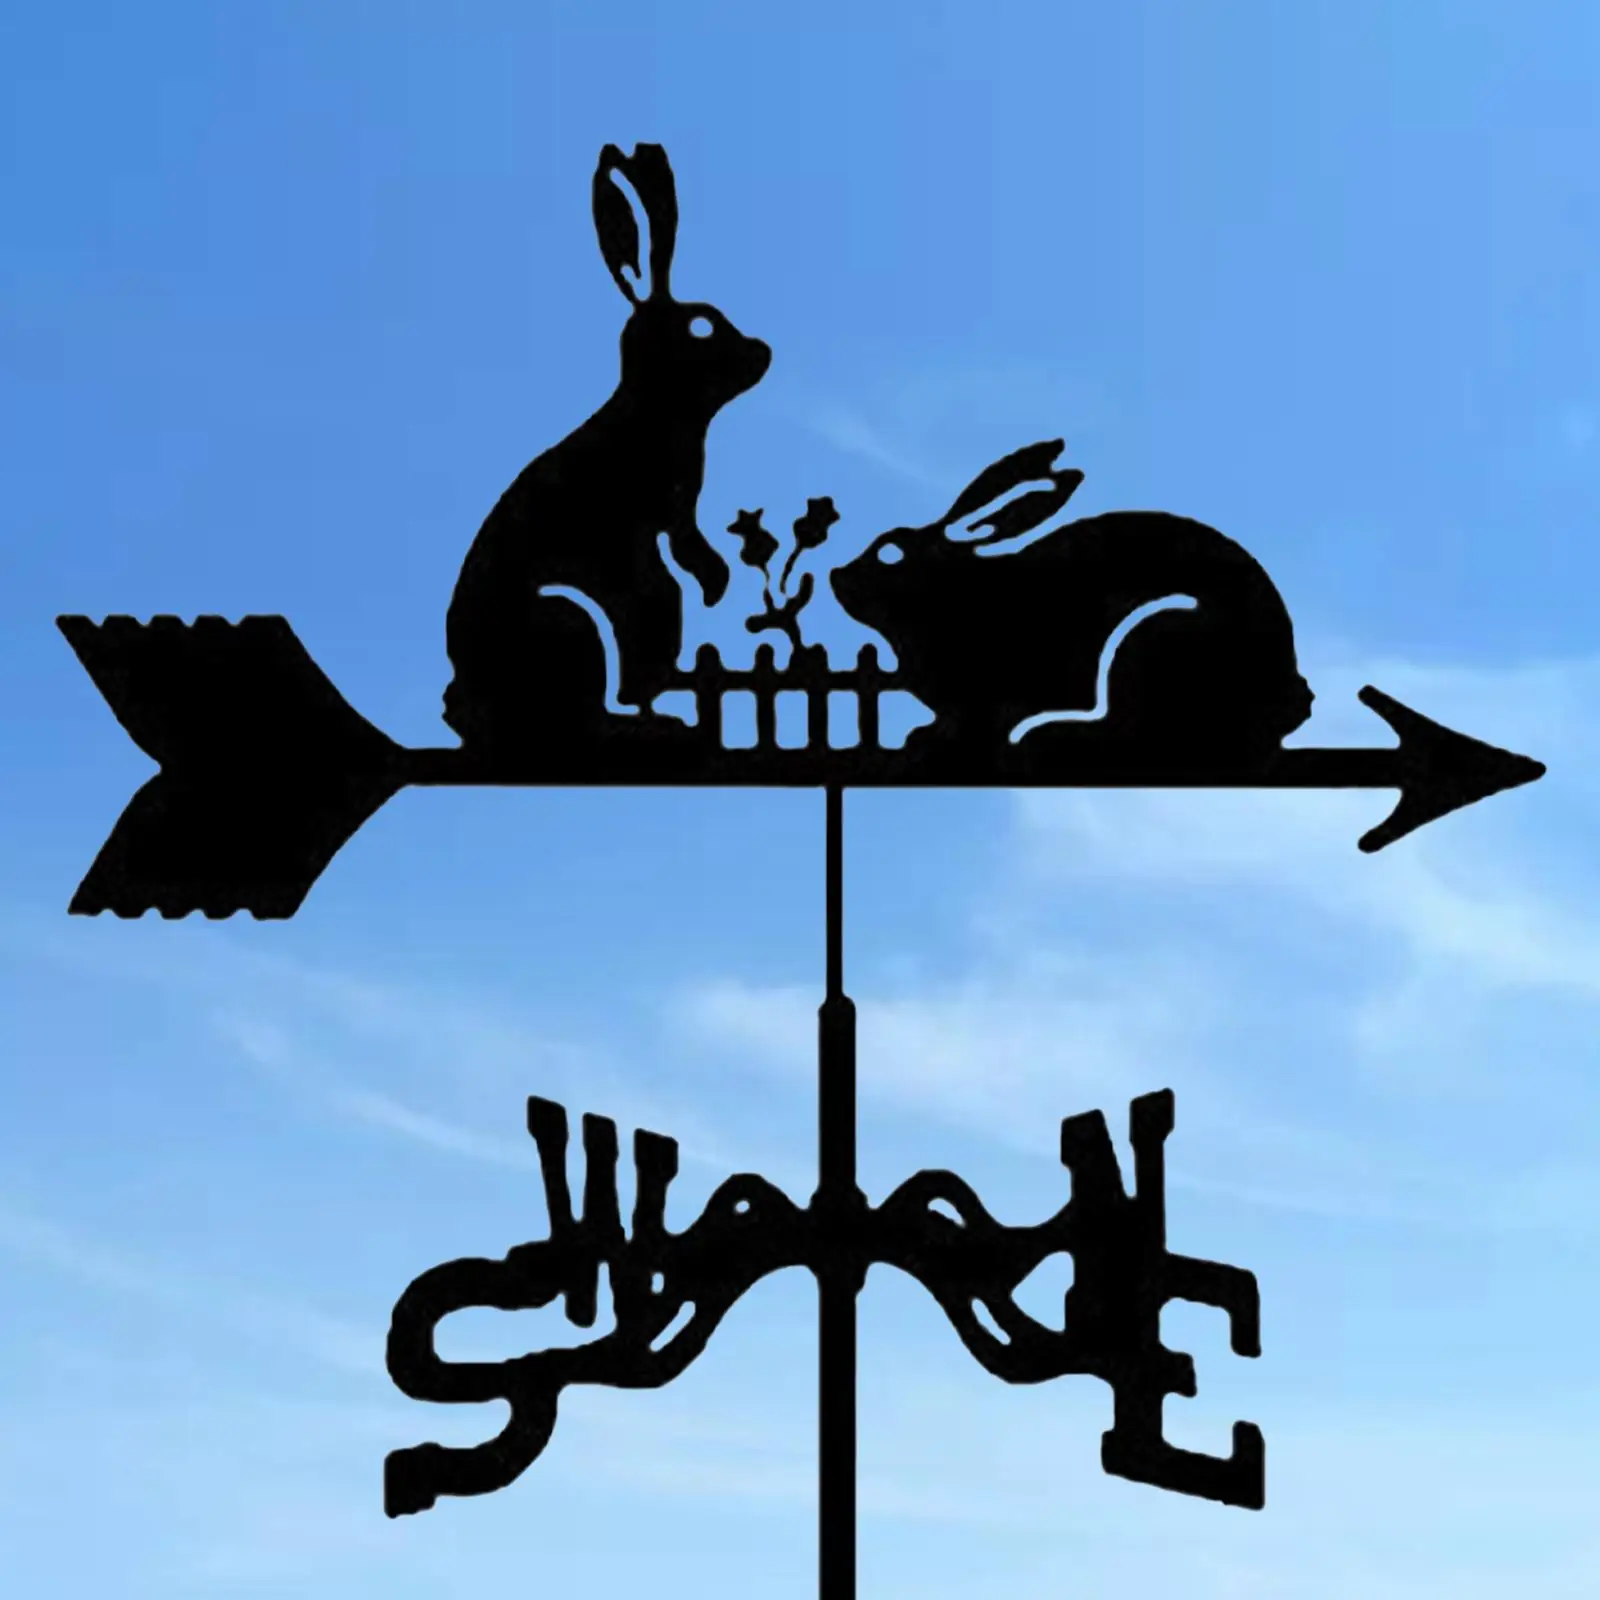 Metal Weather Vane Rabbit Shaped Ornaments Accessories for Outdoor Garden with Rabbit Ornament Retro Wind Direction Indicator